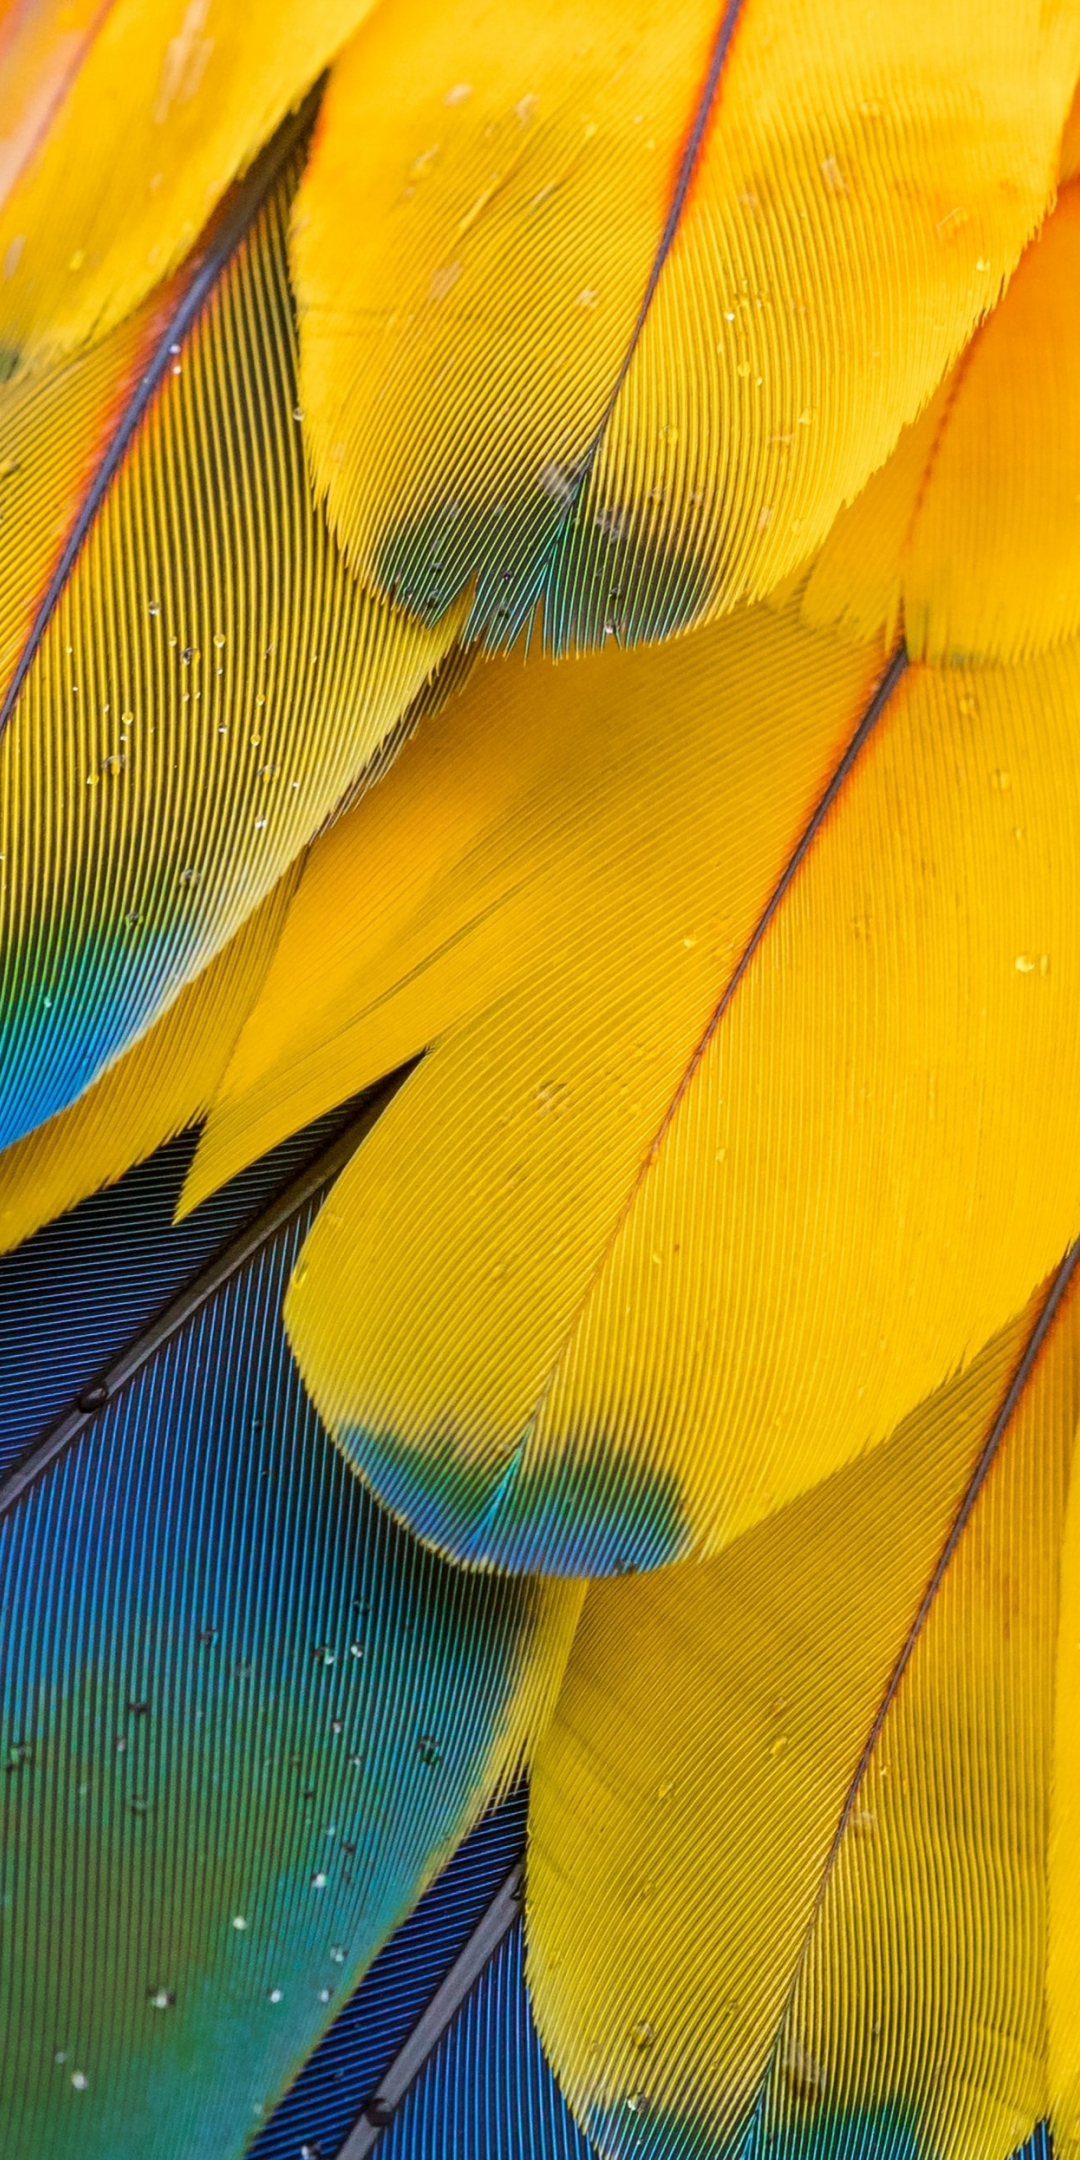 Macaw's feathers, yellow-blue, close up, 1080x2160 wallpaper